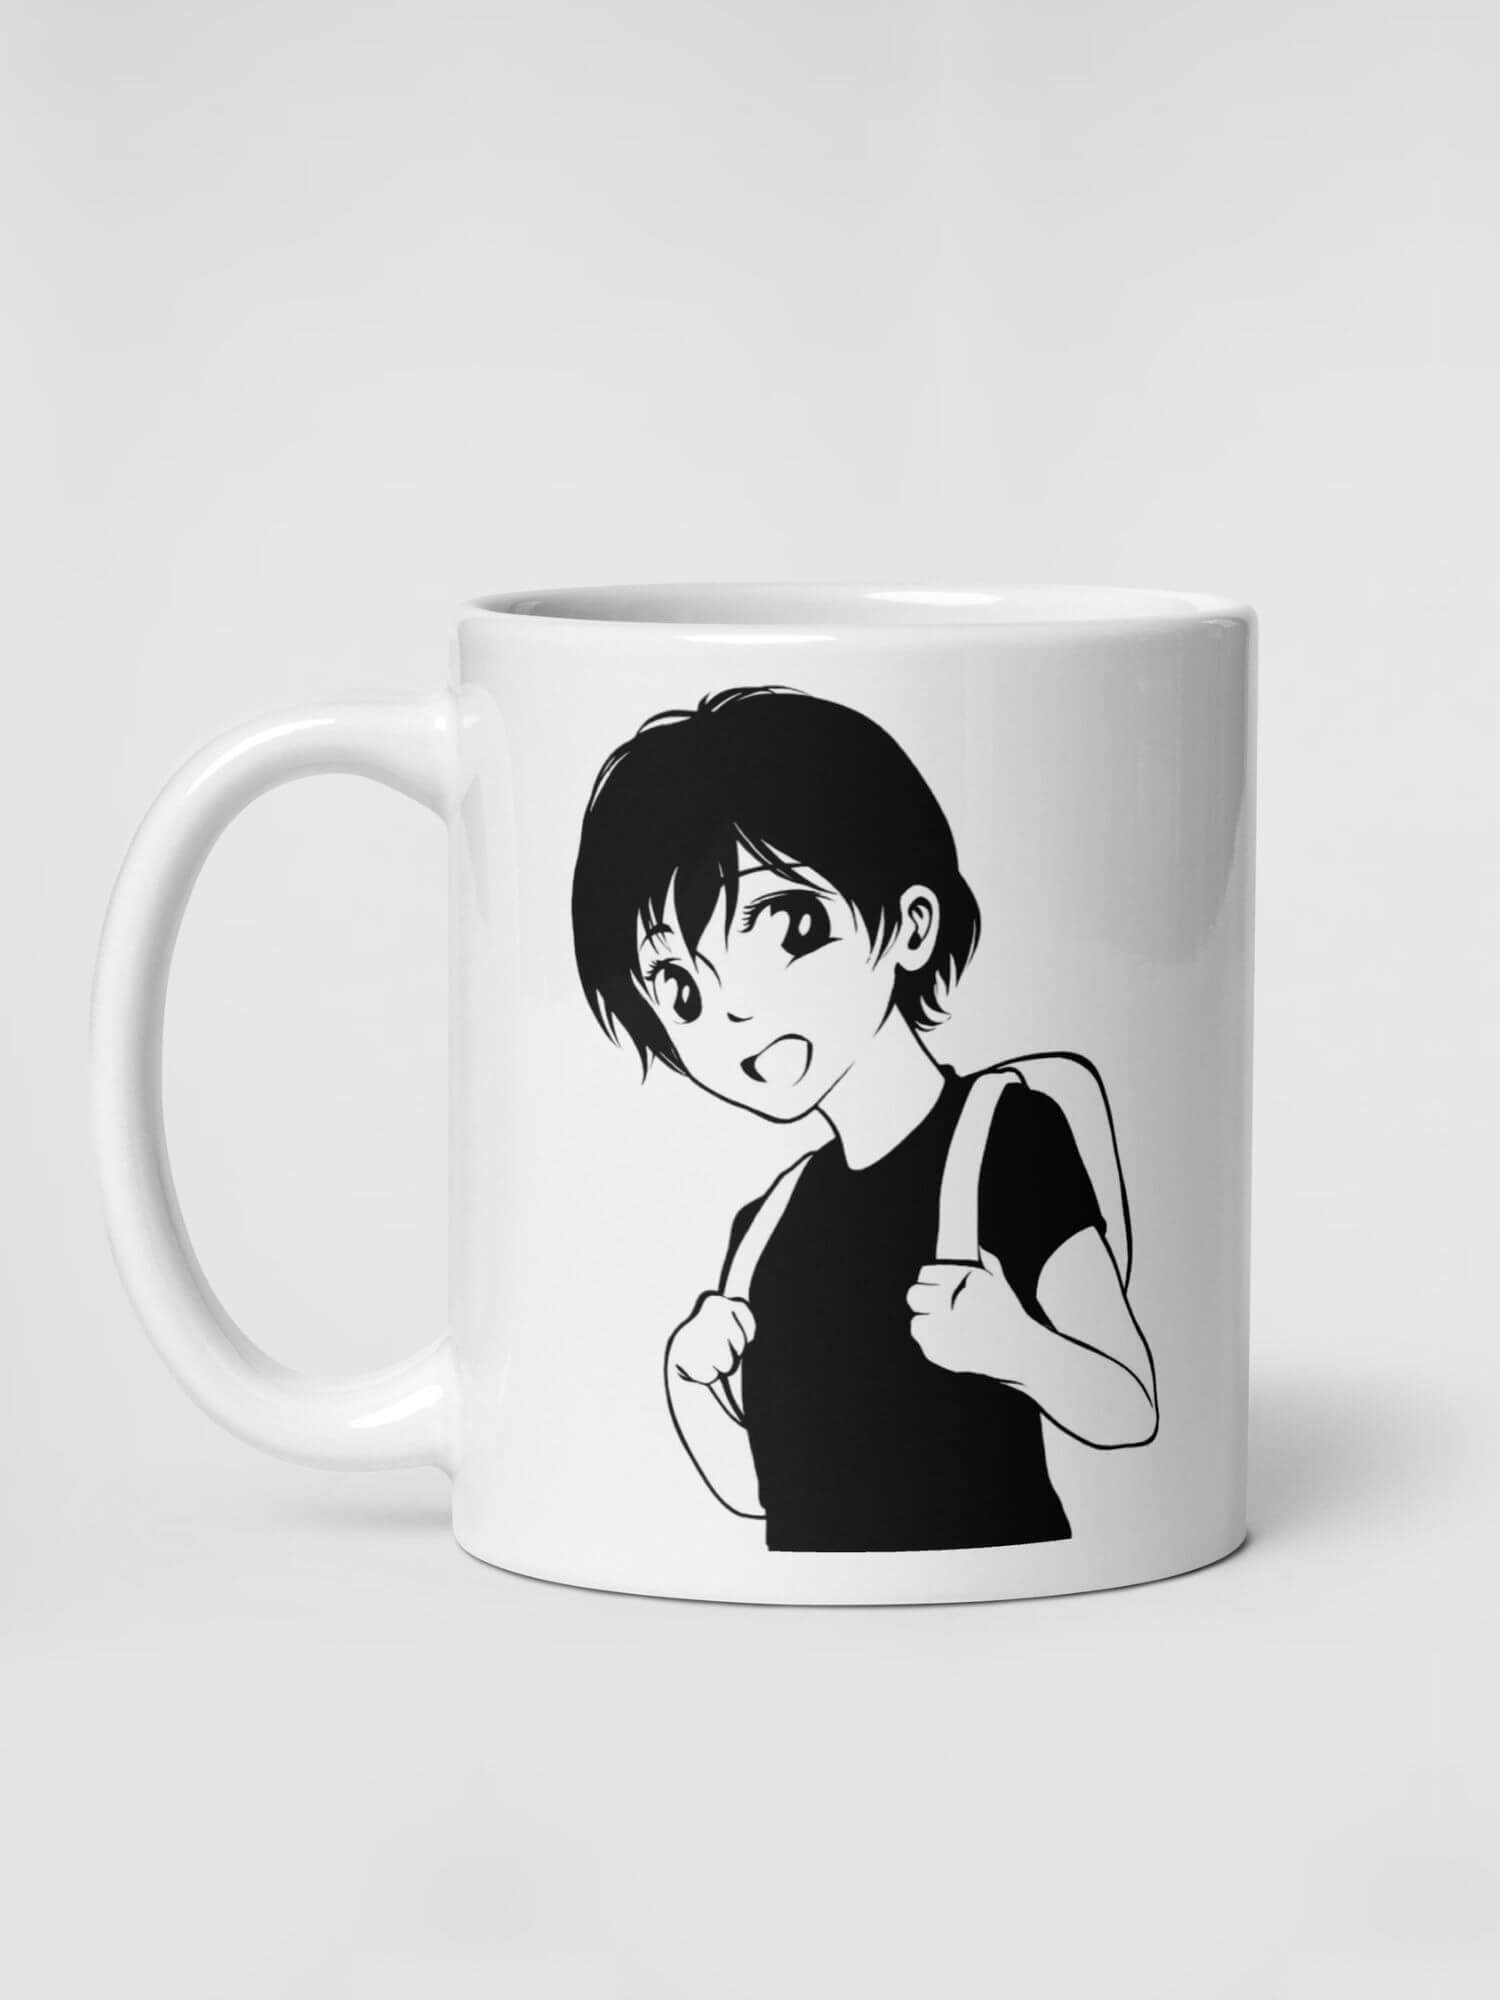 Glossy Backpack Girl Mug    Japan Cartoon women’s  face character drinks cup coffee, tea, juice, milk drinking cups miteigi branded product item tumblers ceramics in white with black ink pattern Ceramic Anime Gifts womens girls gen z generation A backpackers woman Japanese manga souvenirs mugs